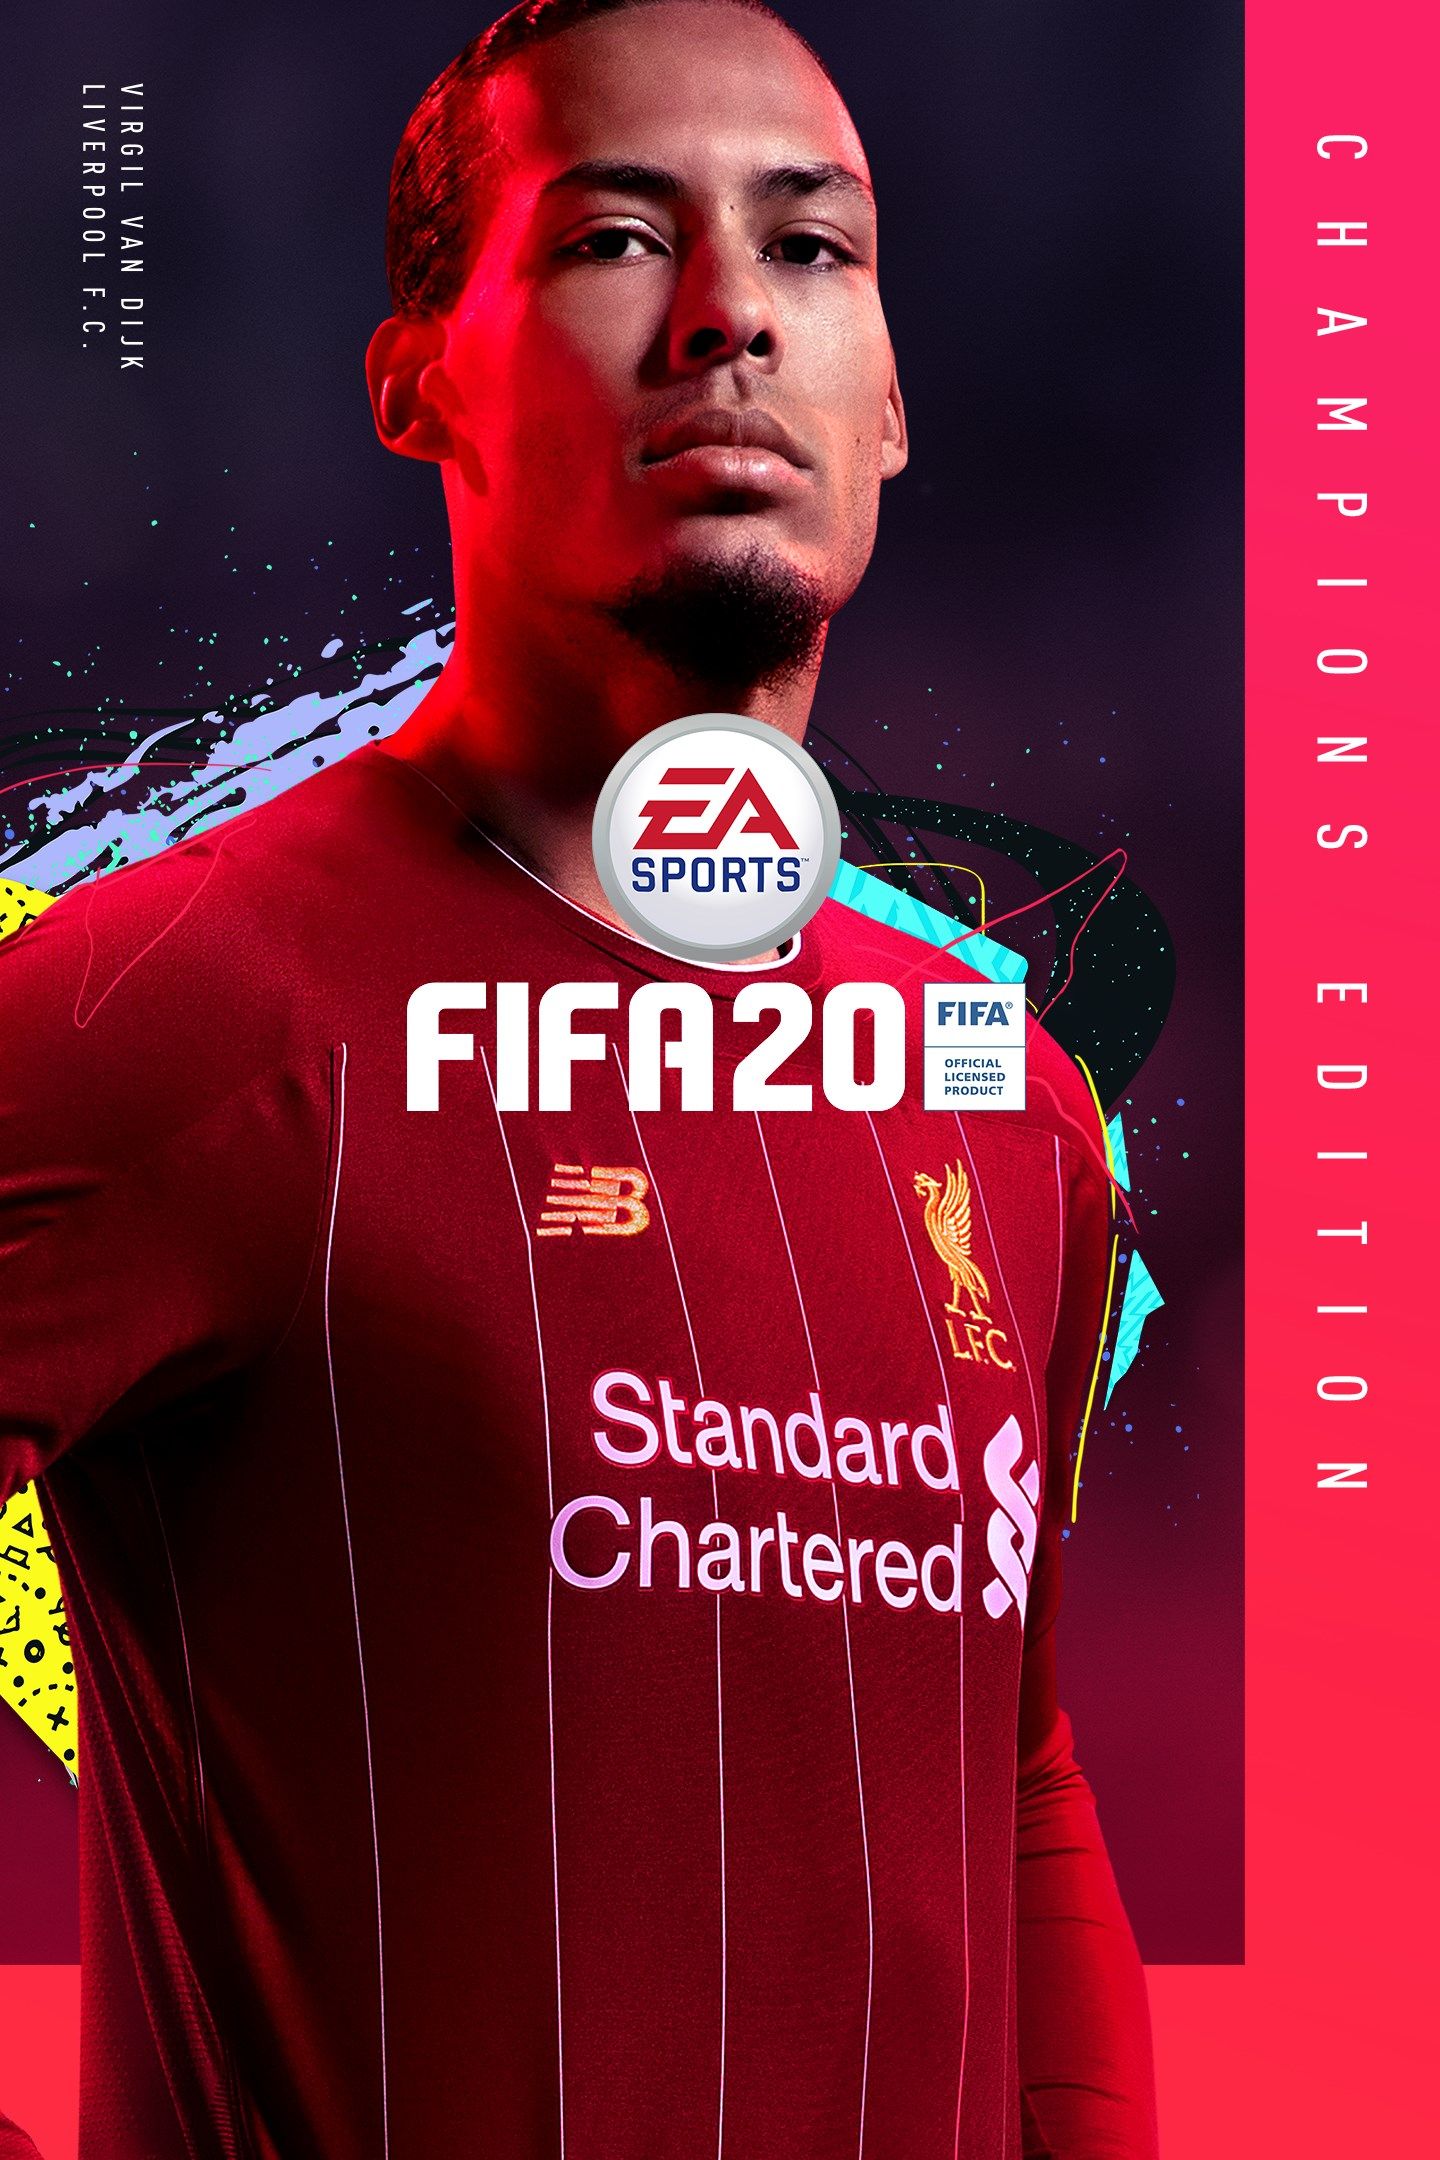 FIFA 20 for Xbox One